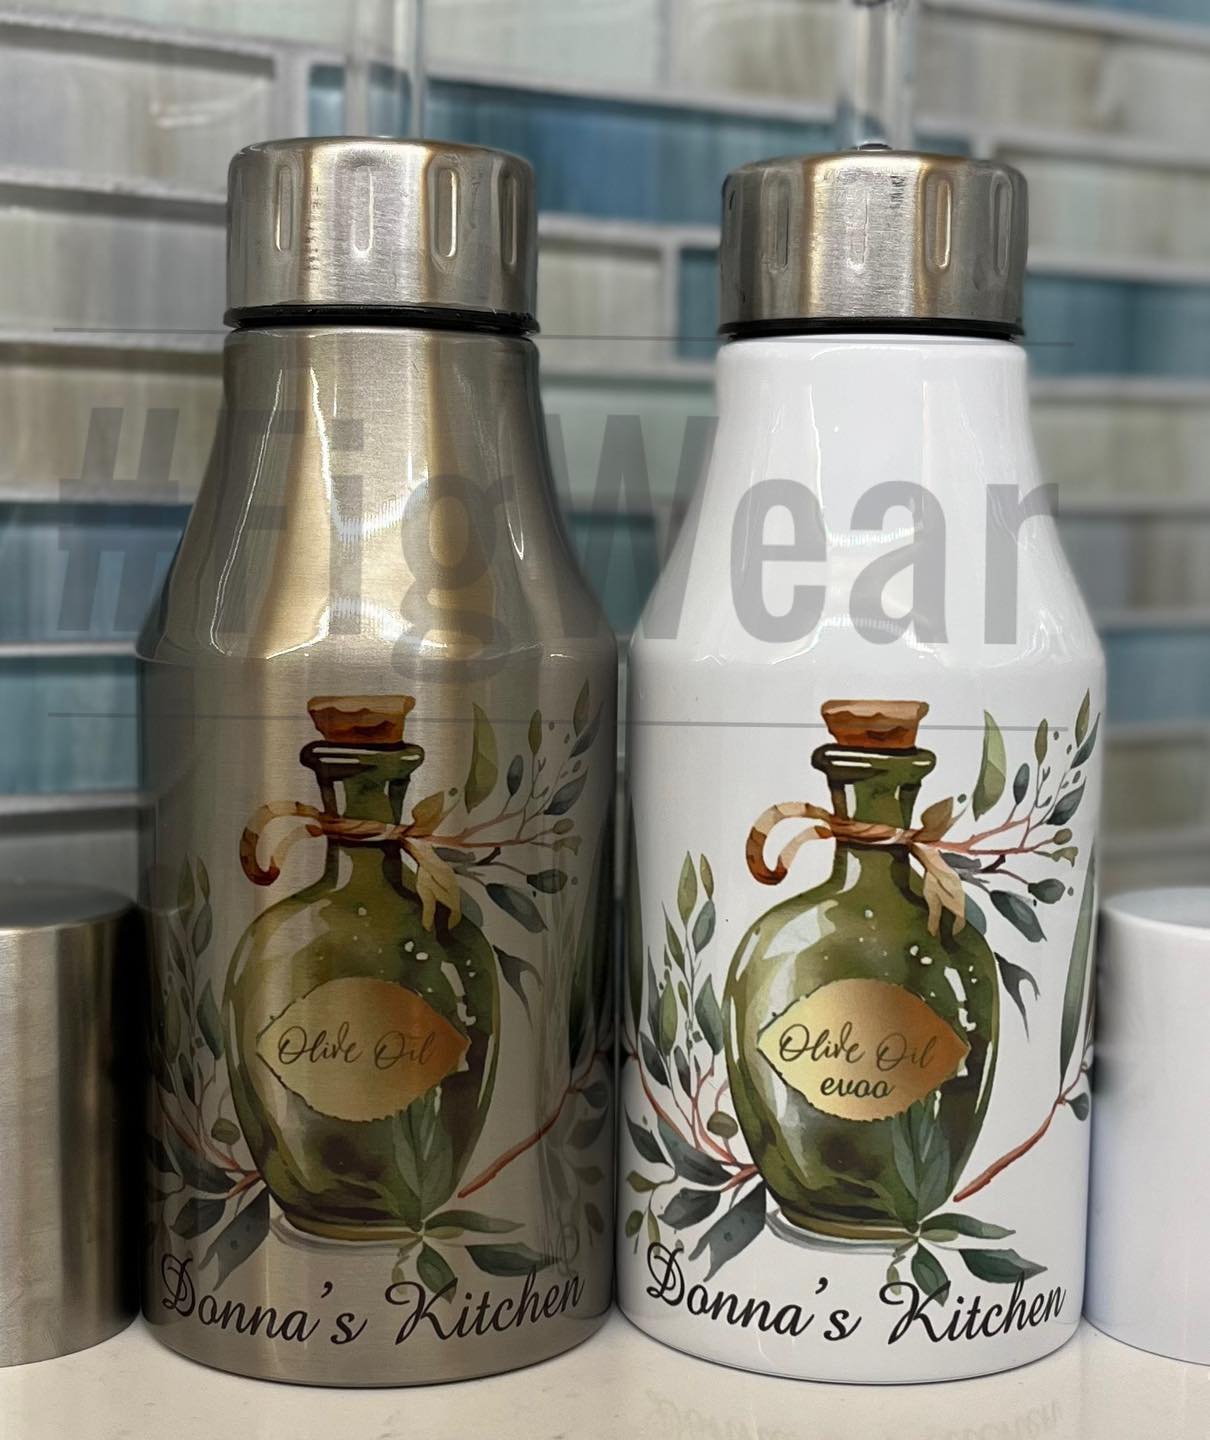 Custom printed so the olive oils can be kept on the counter fresh and handy!  No more lugging o